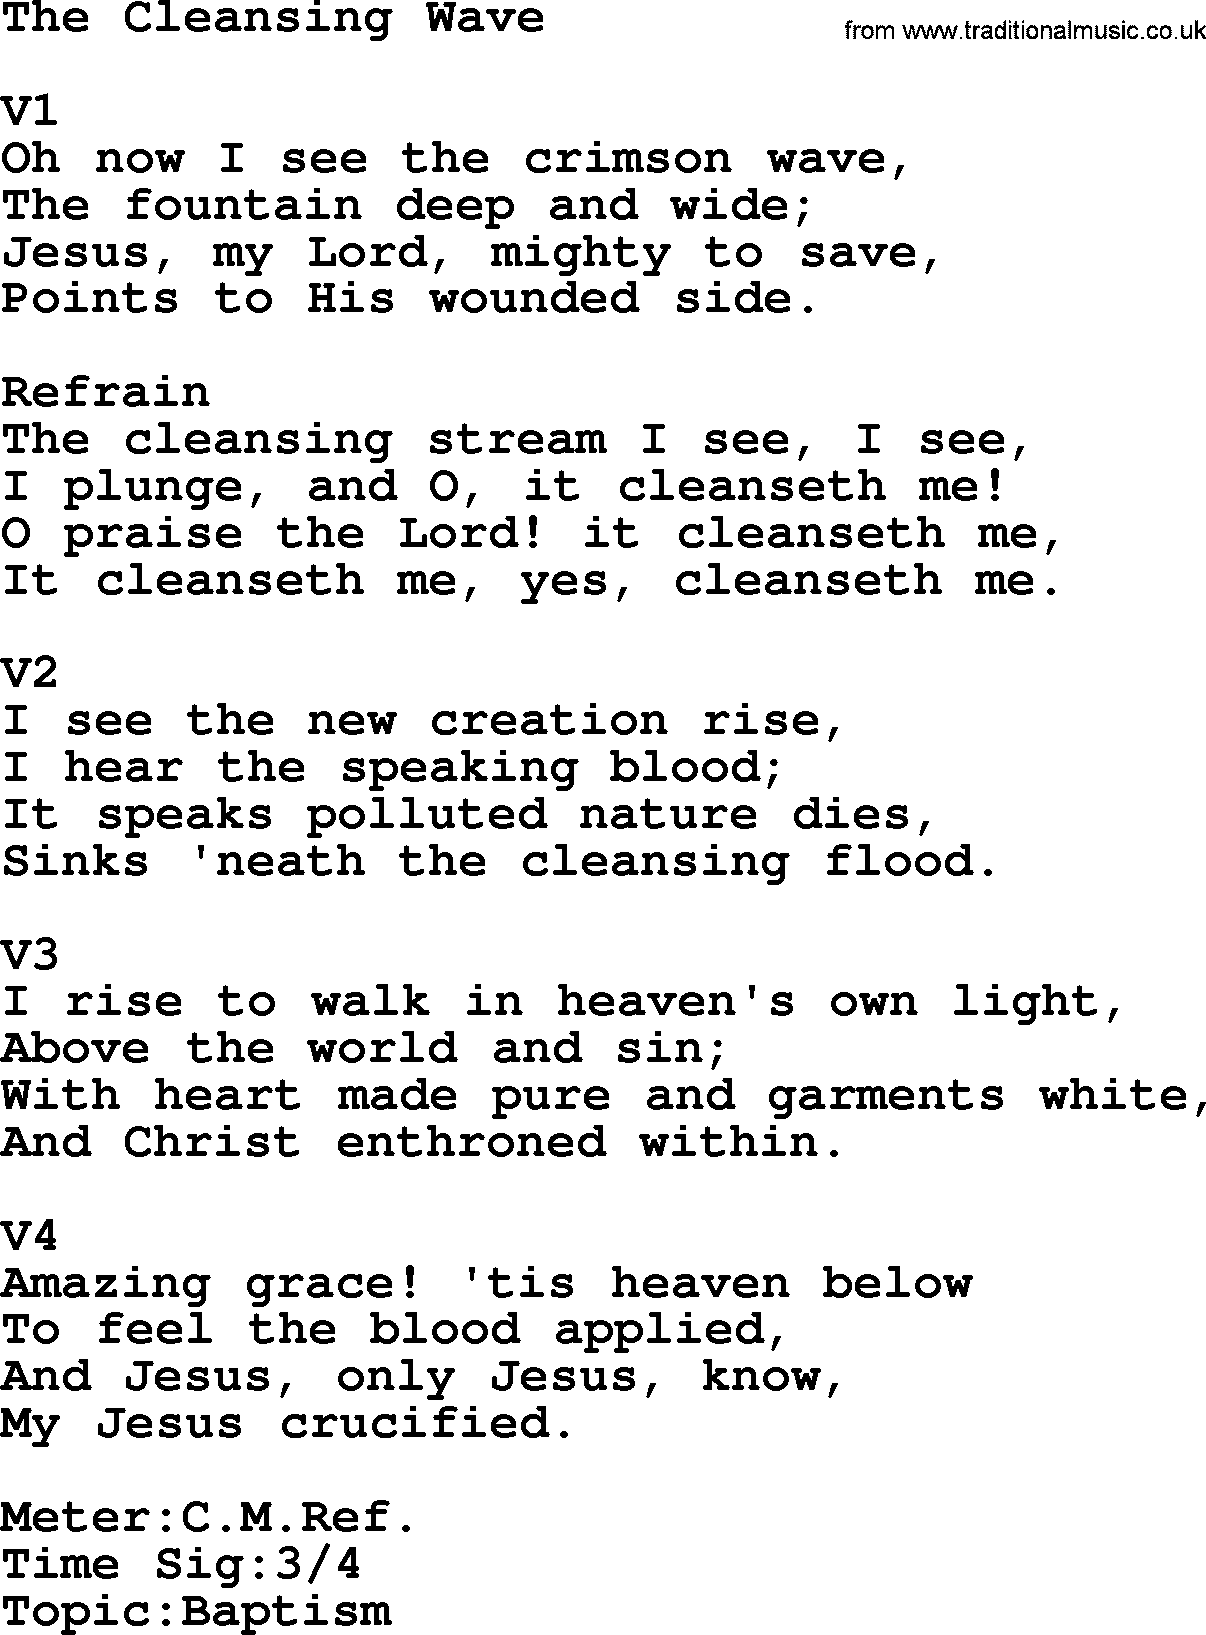 Adventist Hynms collection, Hymn: The Cleansing Wave, lyrics with PDF